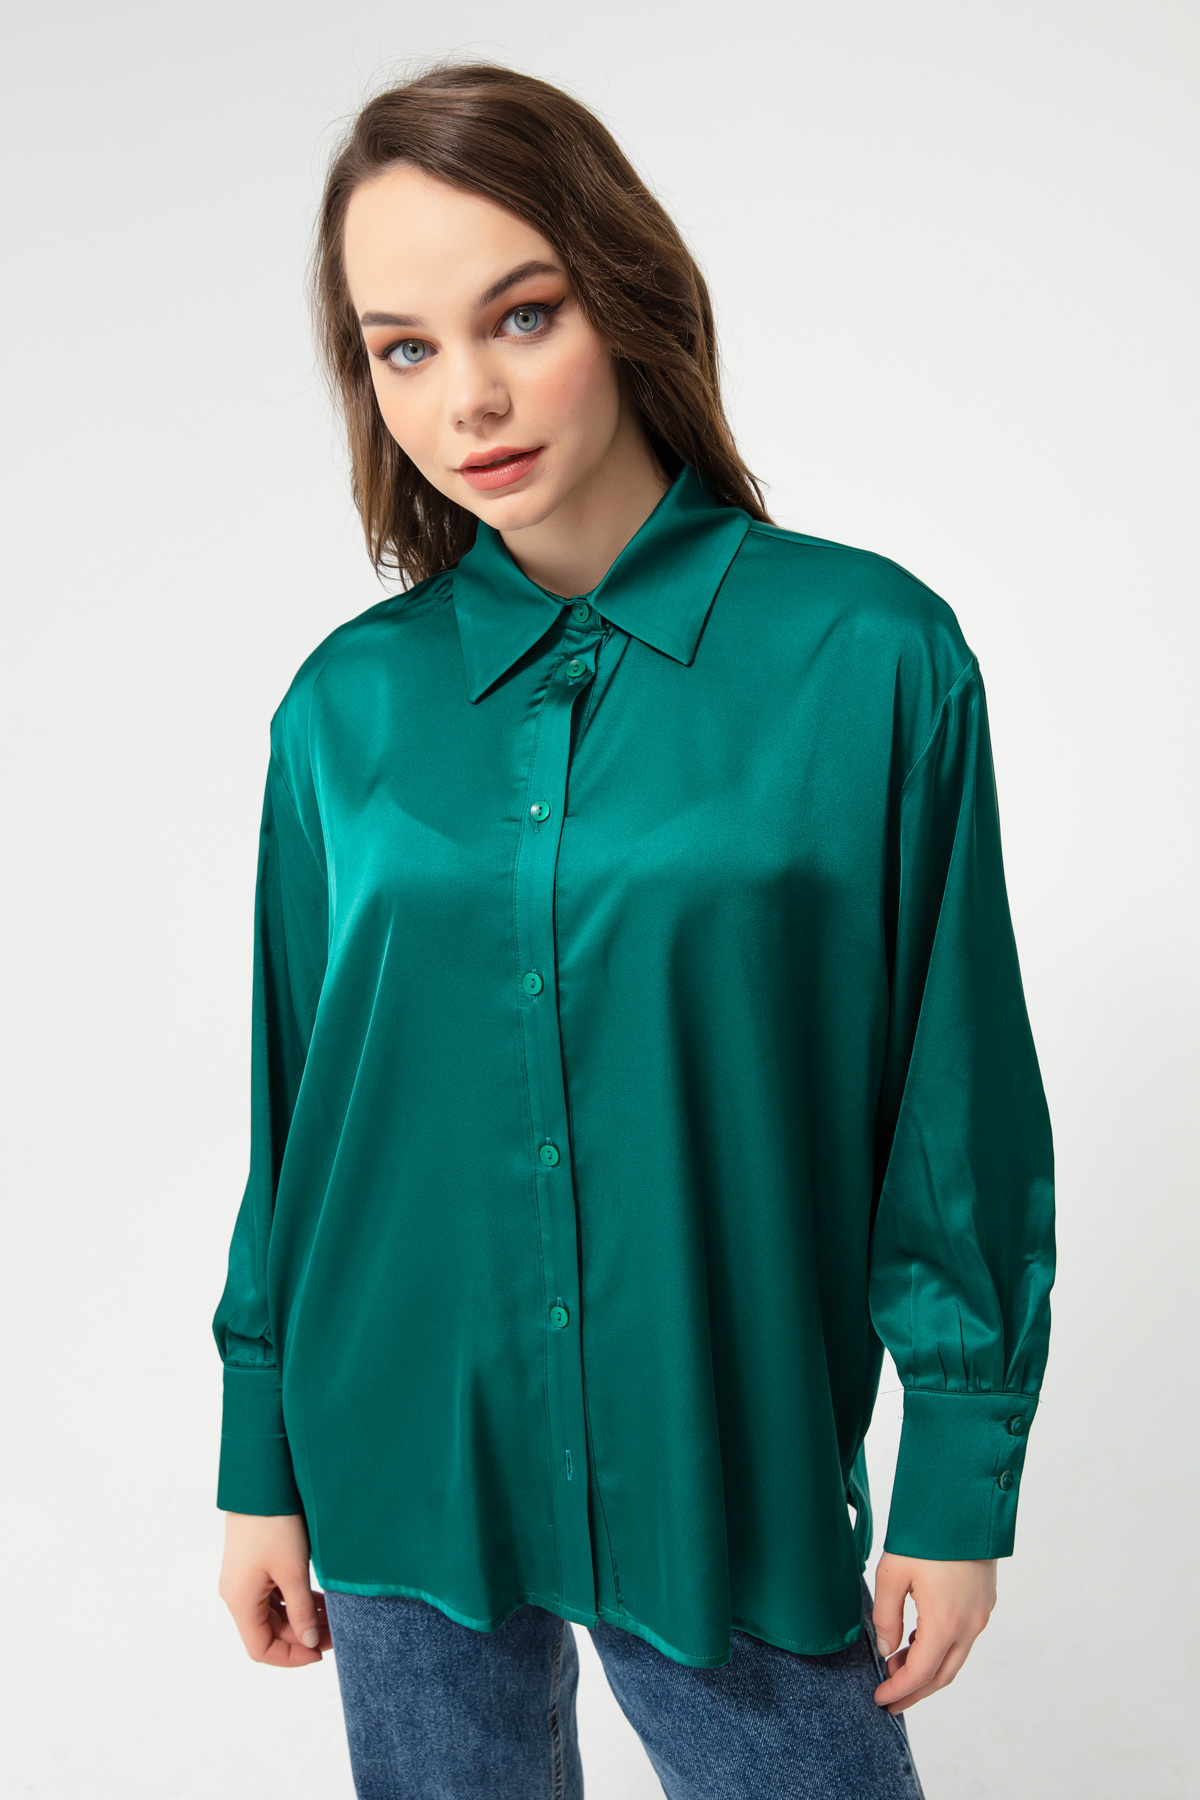 Silky Green Blouse - Image Chest - Free Image Hosting And Sharing Made Easy